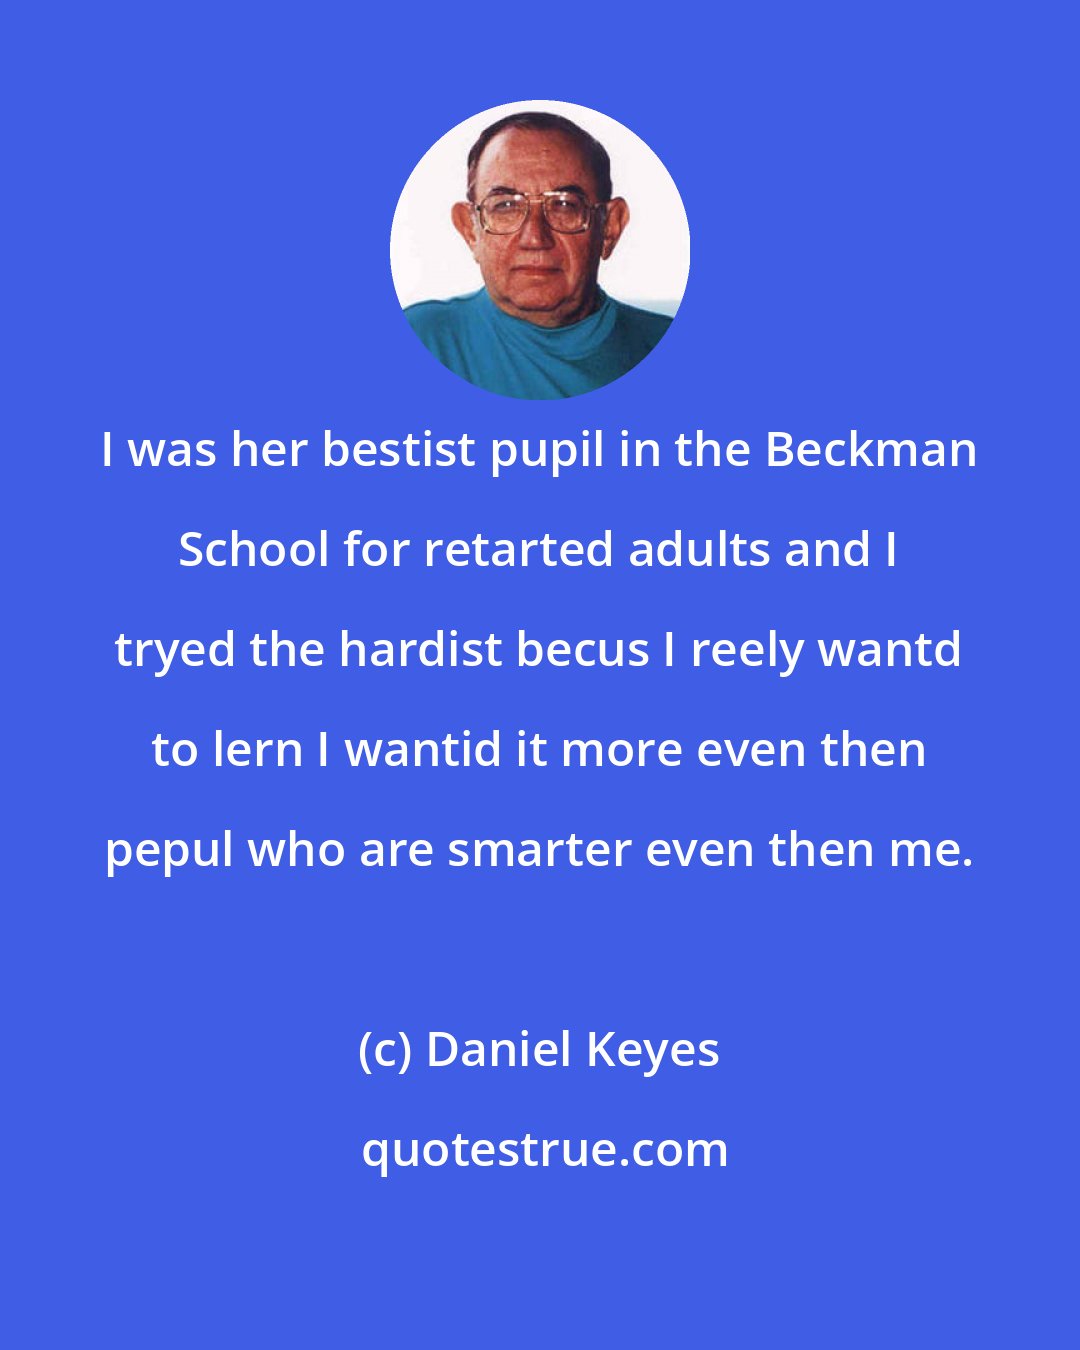 Daniel Keyes: I was her bestist pupil in the Beckman School for retarted adults and I tryed the hardist becus I reely wantd to lern I wantid it more even then pepul who are smarter even then me.